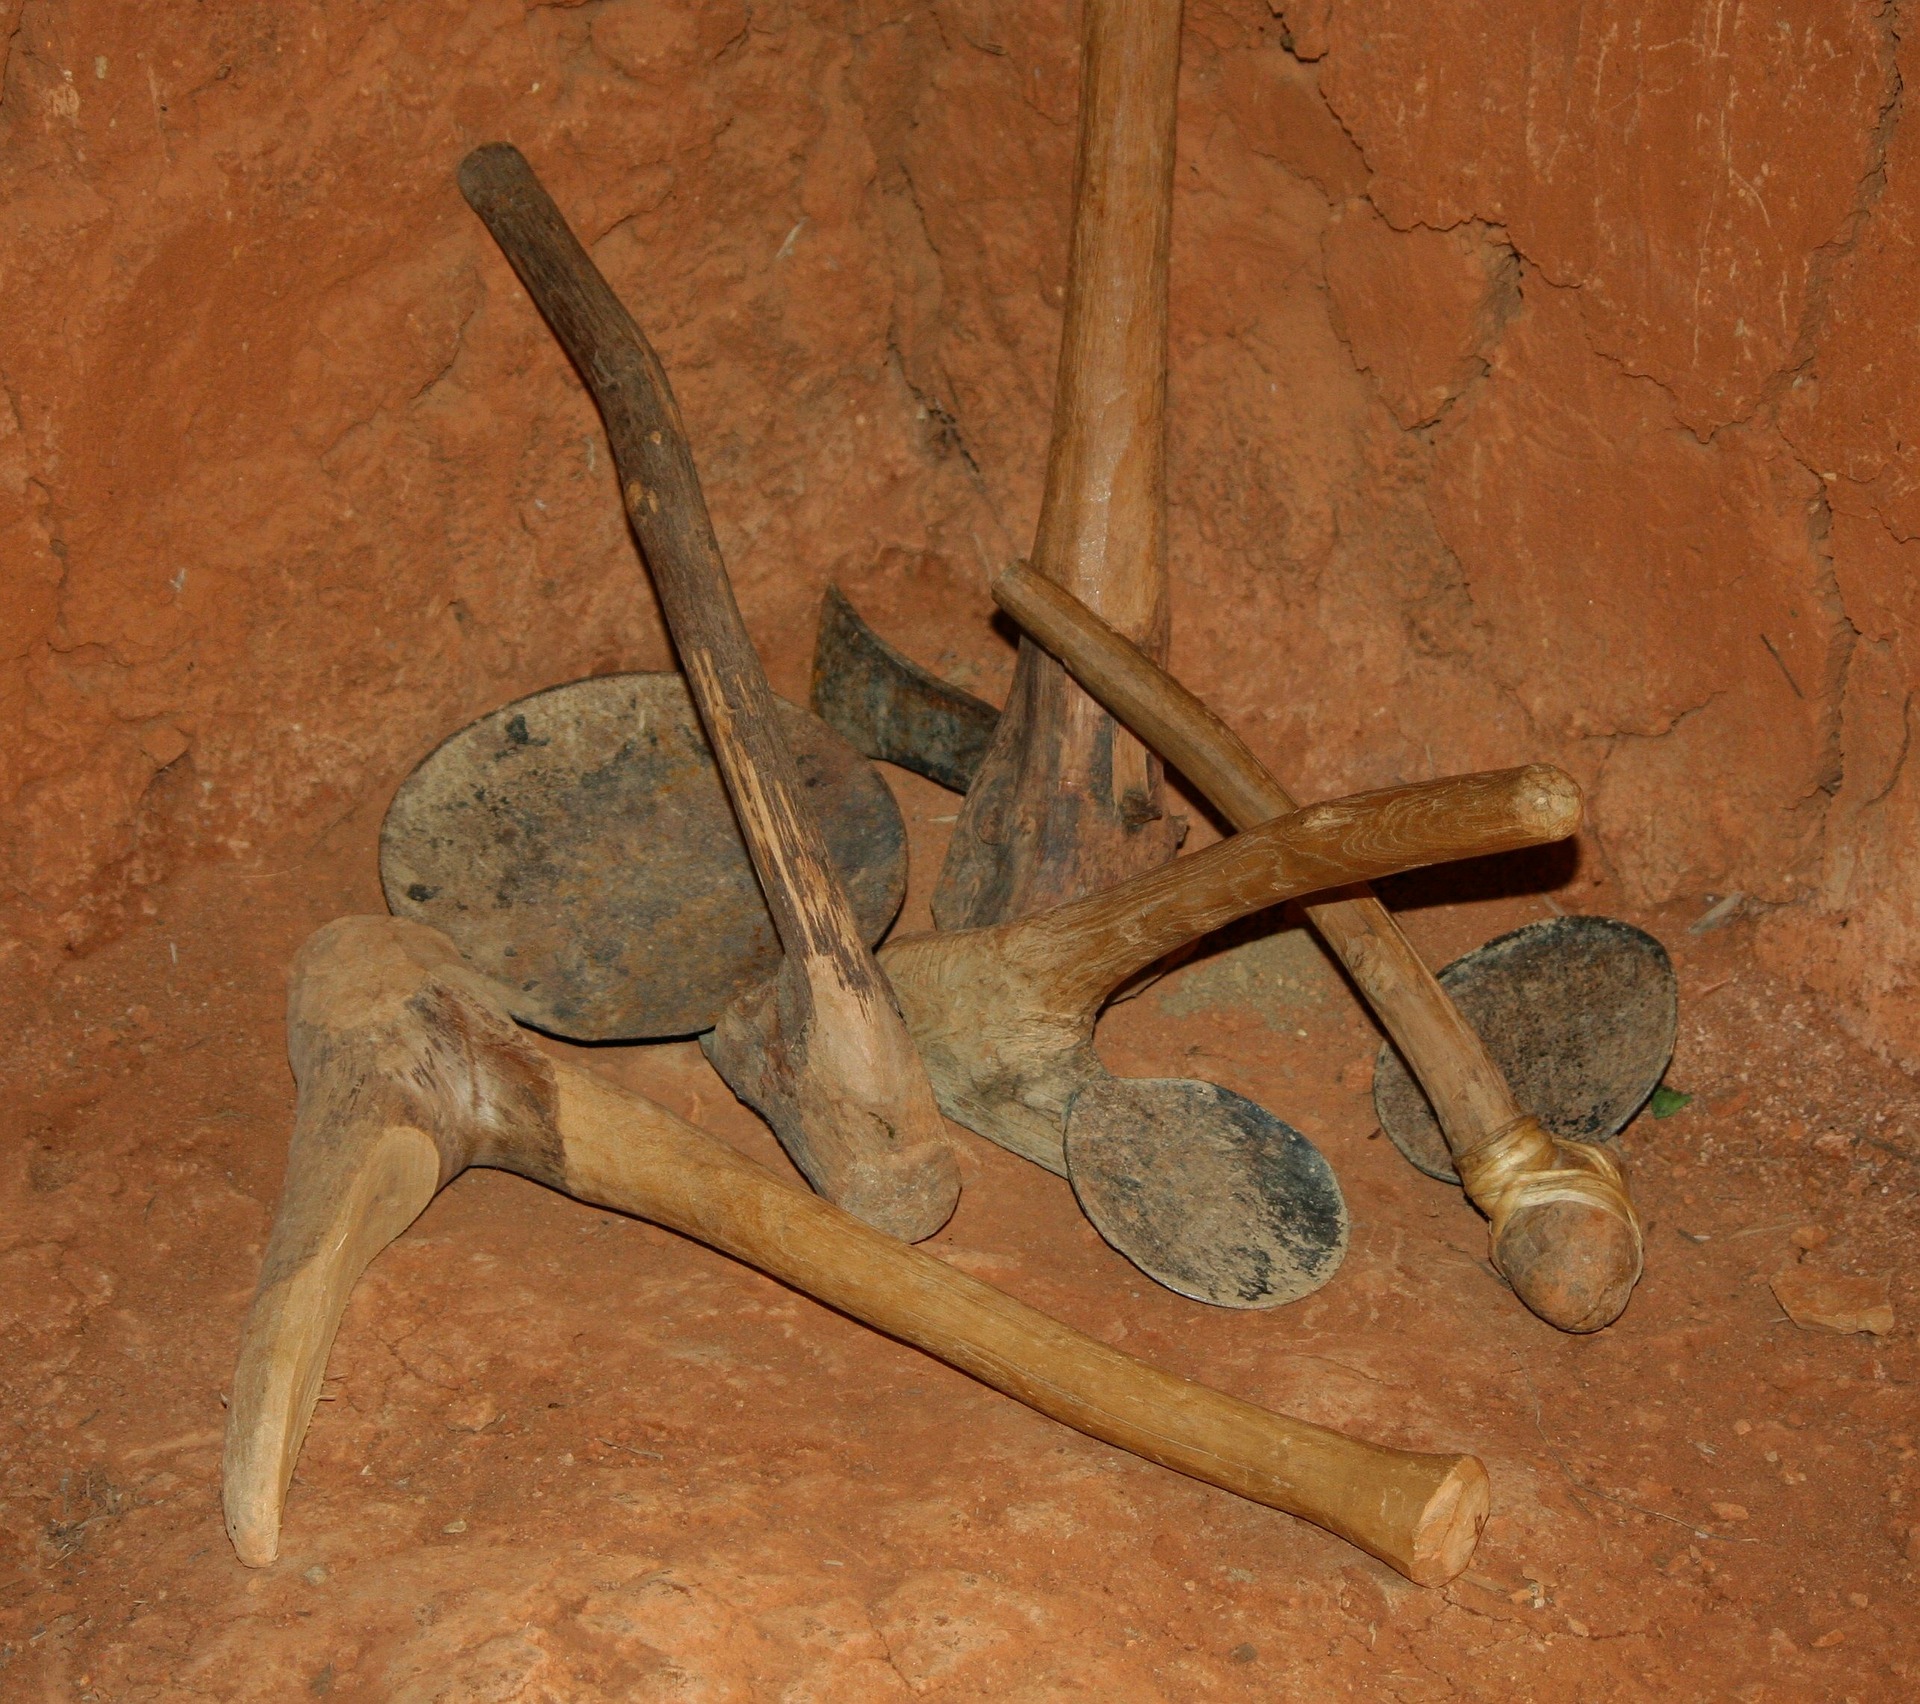 Image of ancient tools